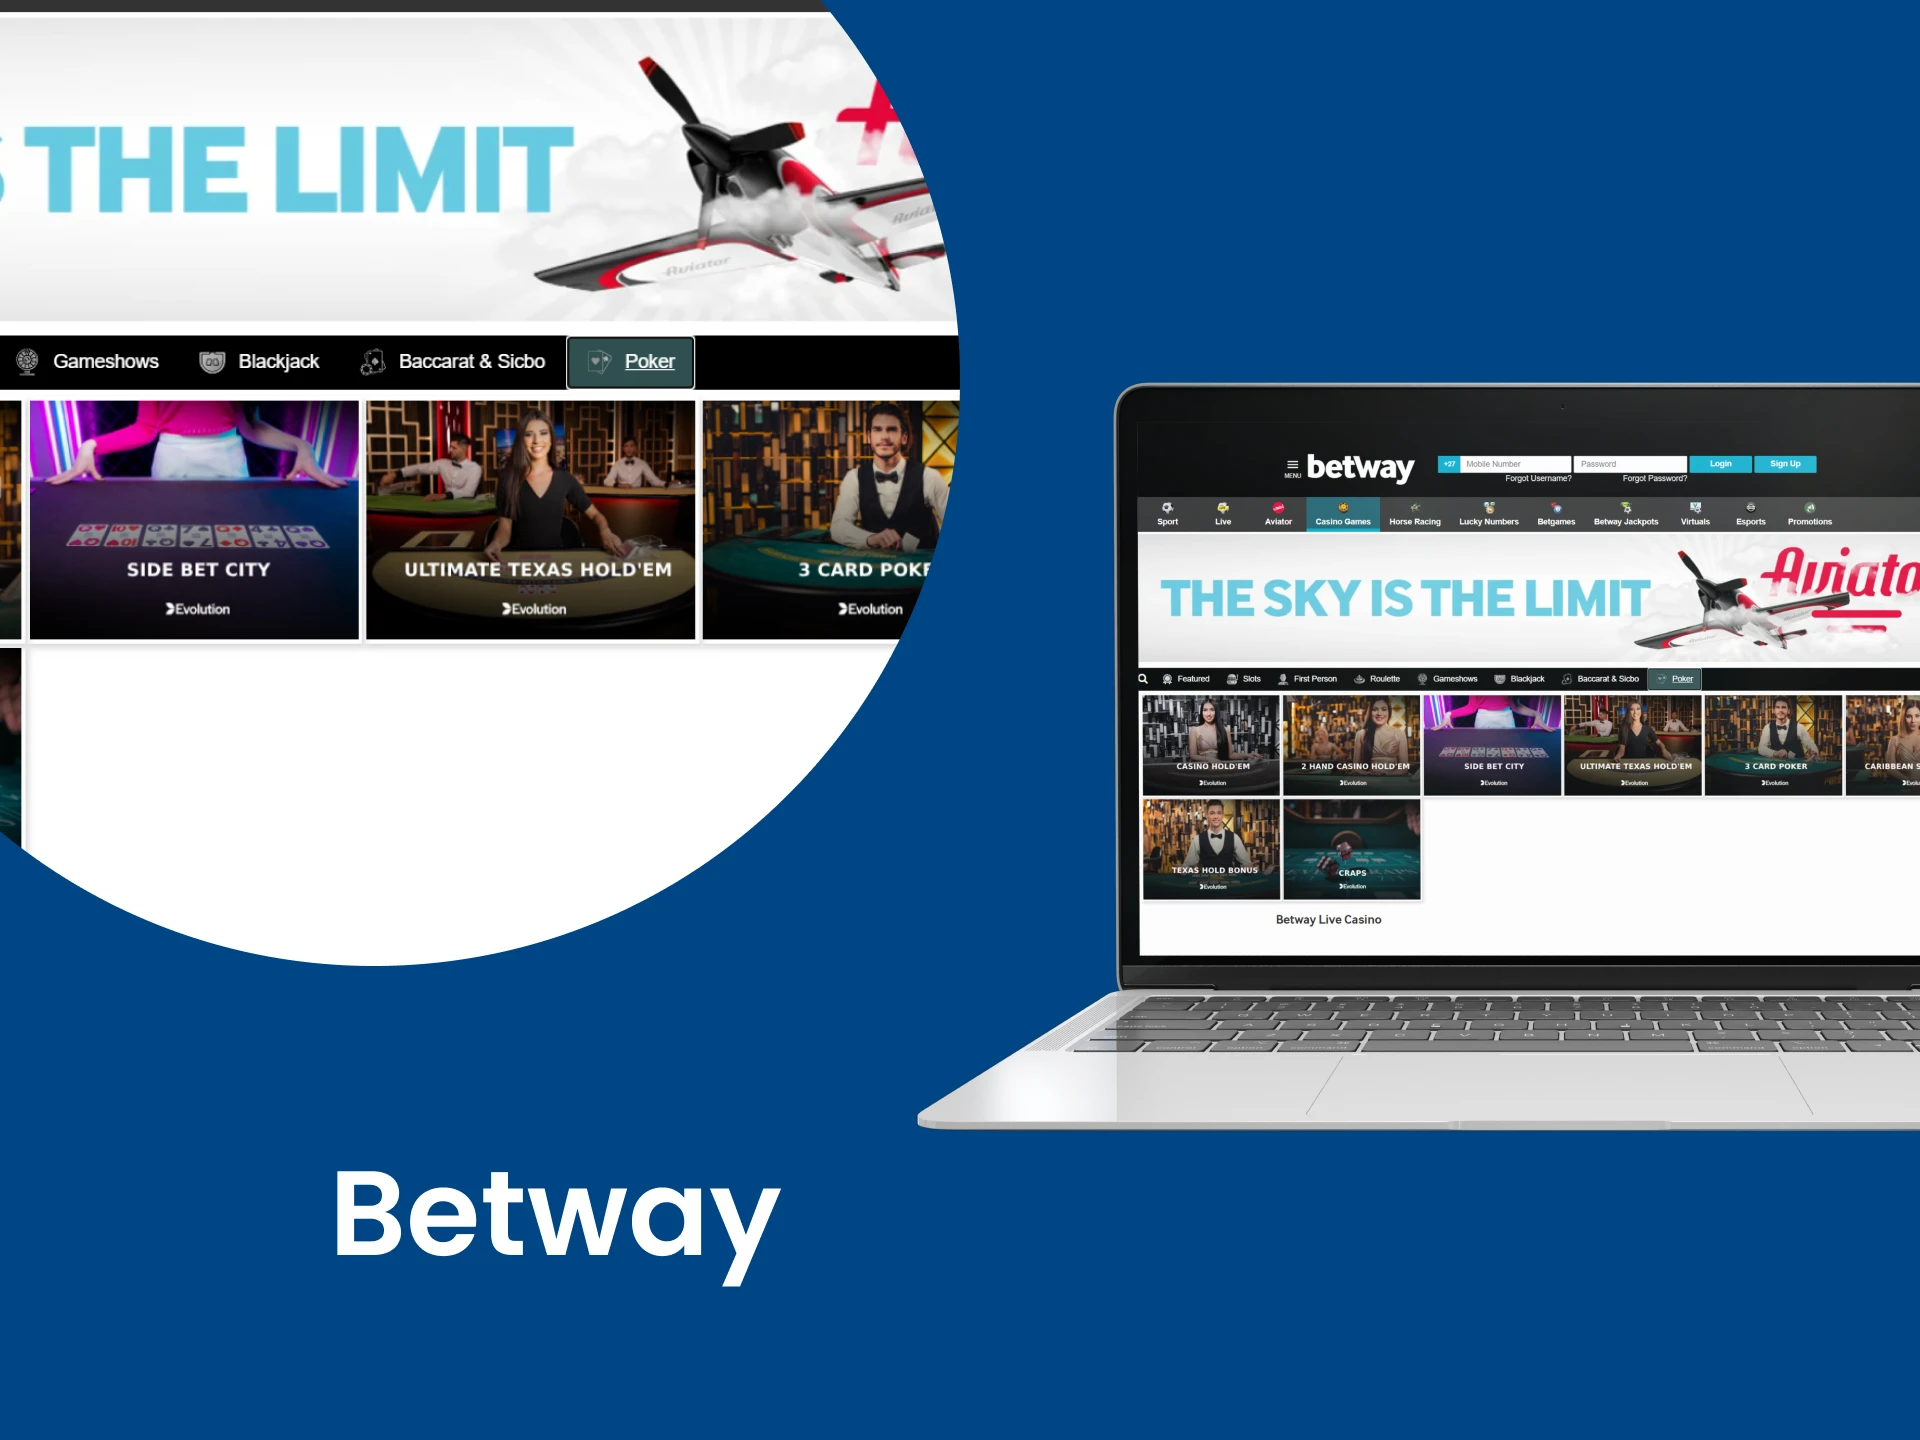 Play Video Poker on the Betway service.